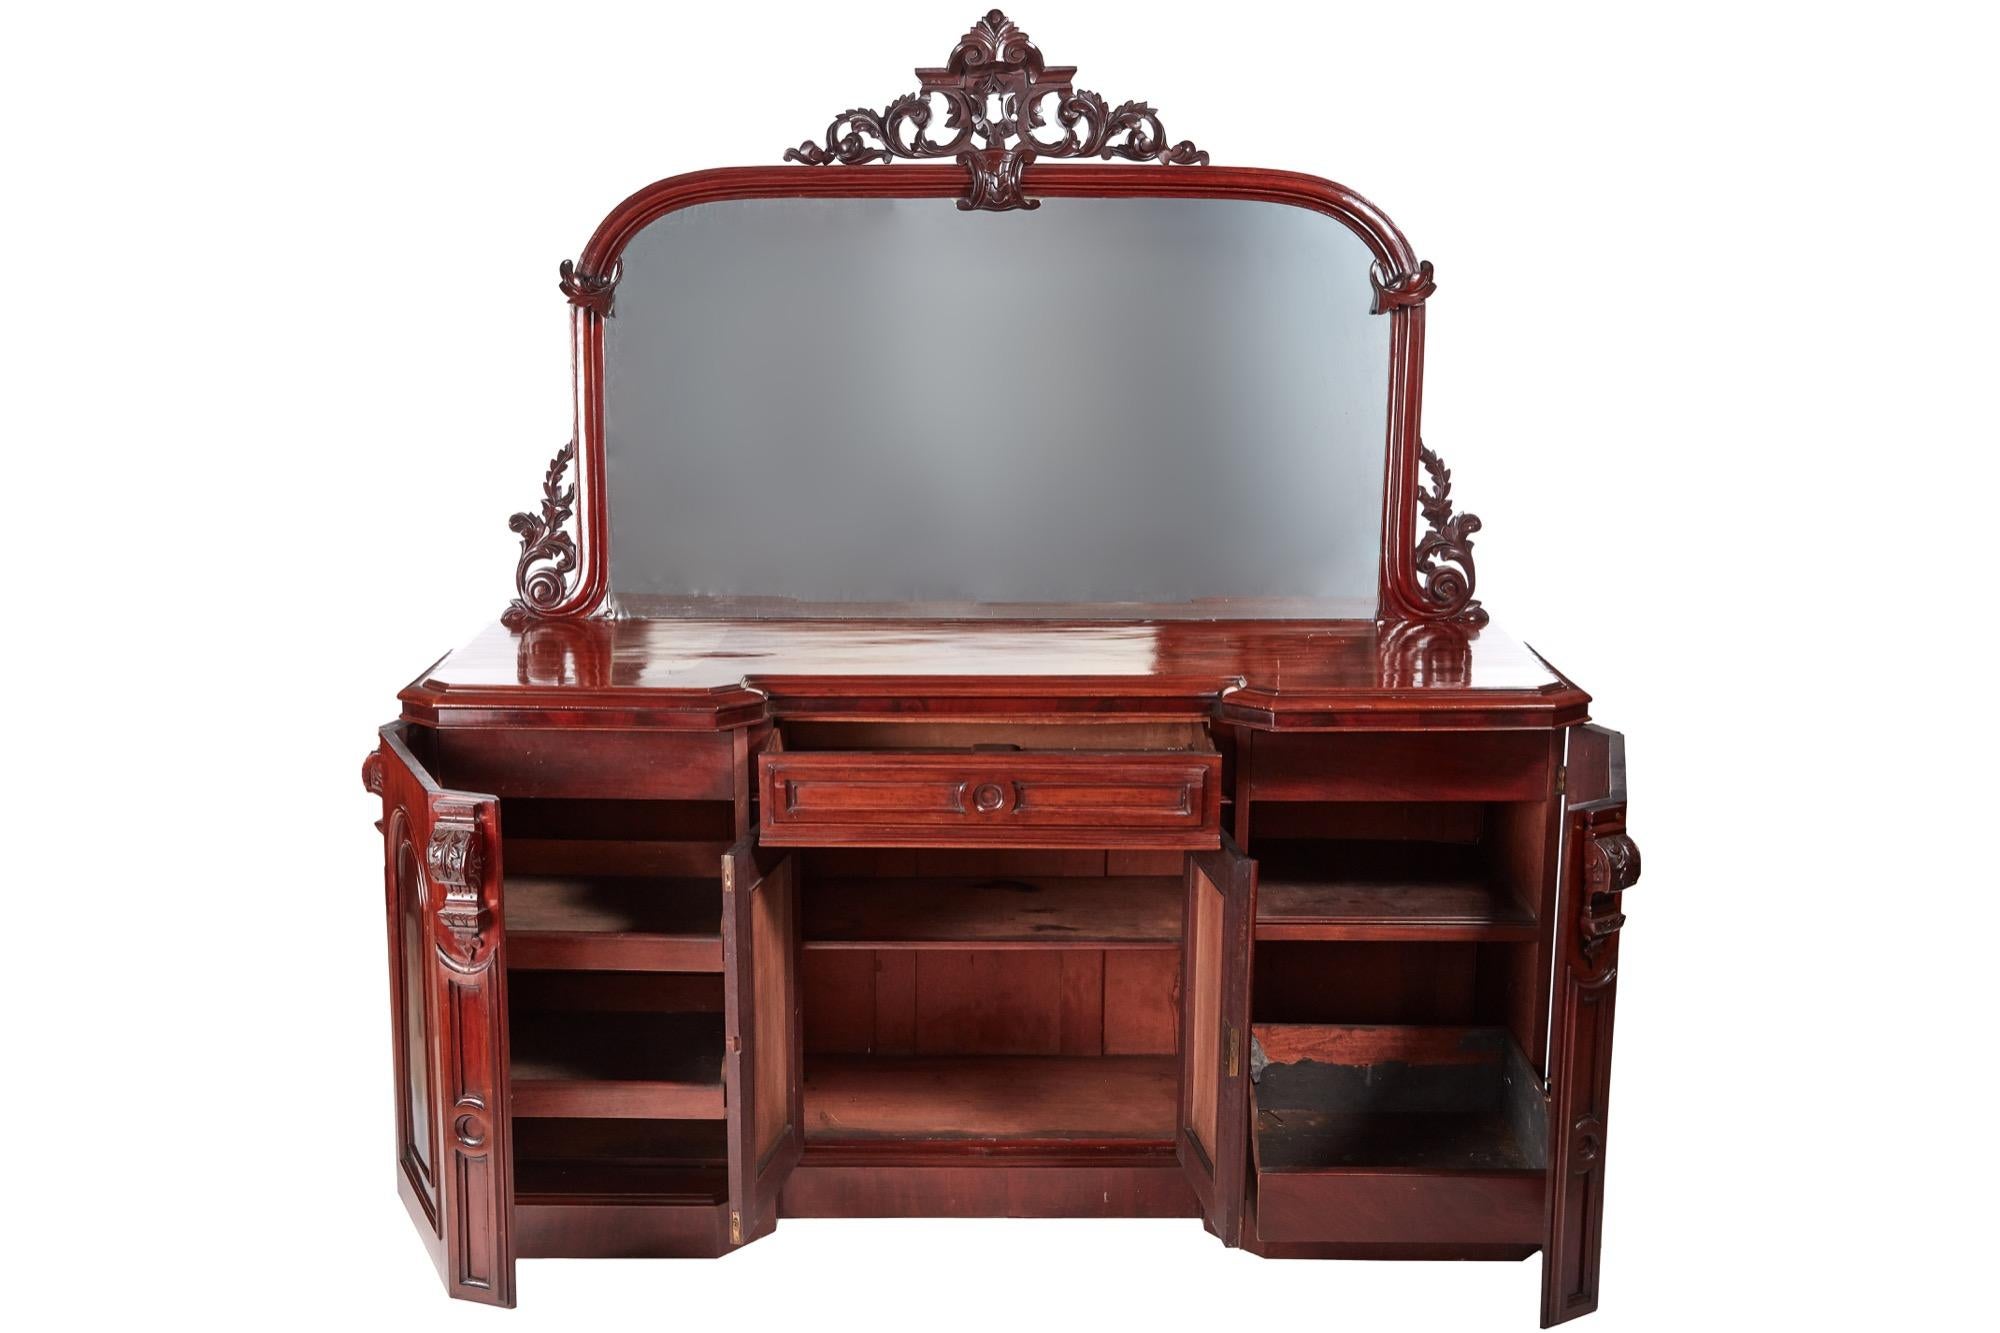 Quality antique carved Victorian mahogany mirror back sideboard with a beautifully carved mirror back. The base having a quality mahogany top, one drawer to the centre, four figured mahogany panelled doors, lovely fitted interior with drawers and